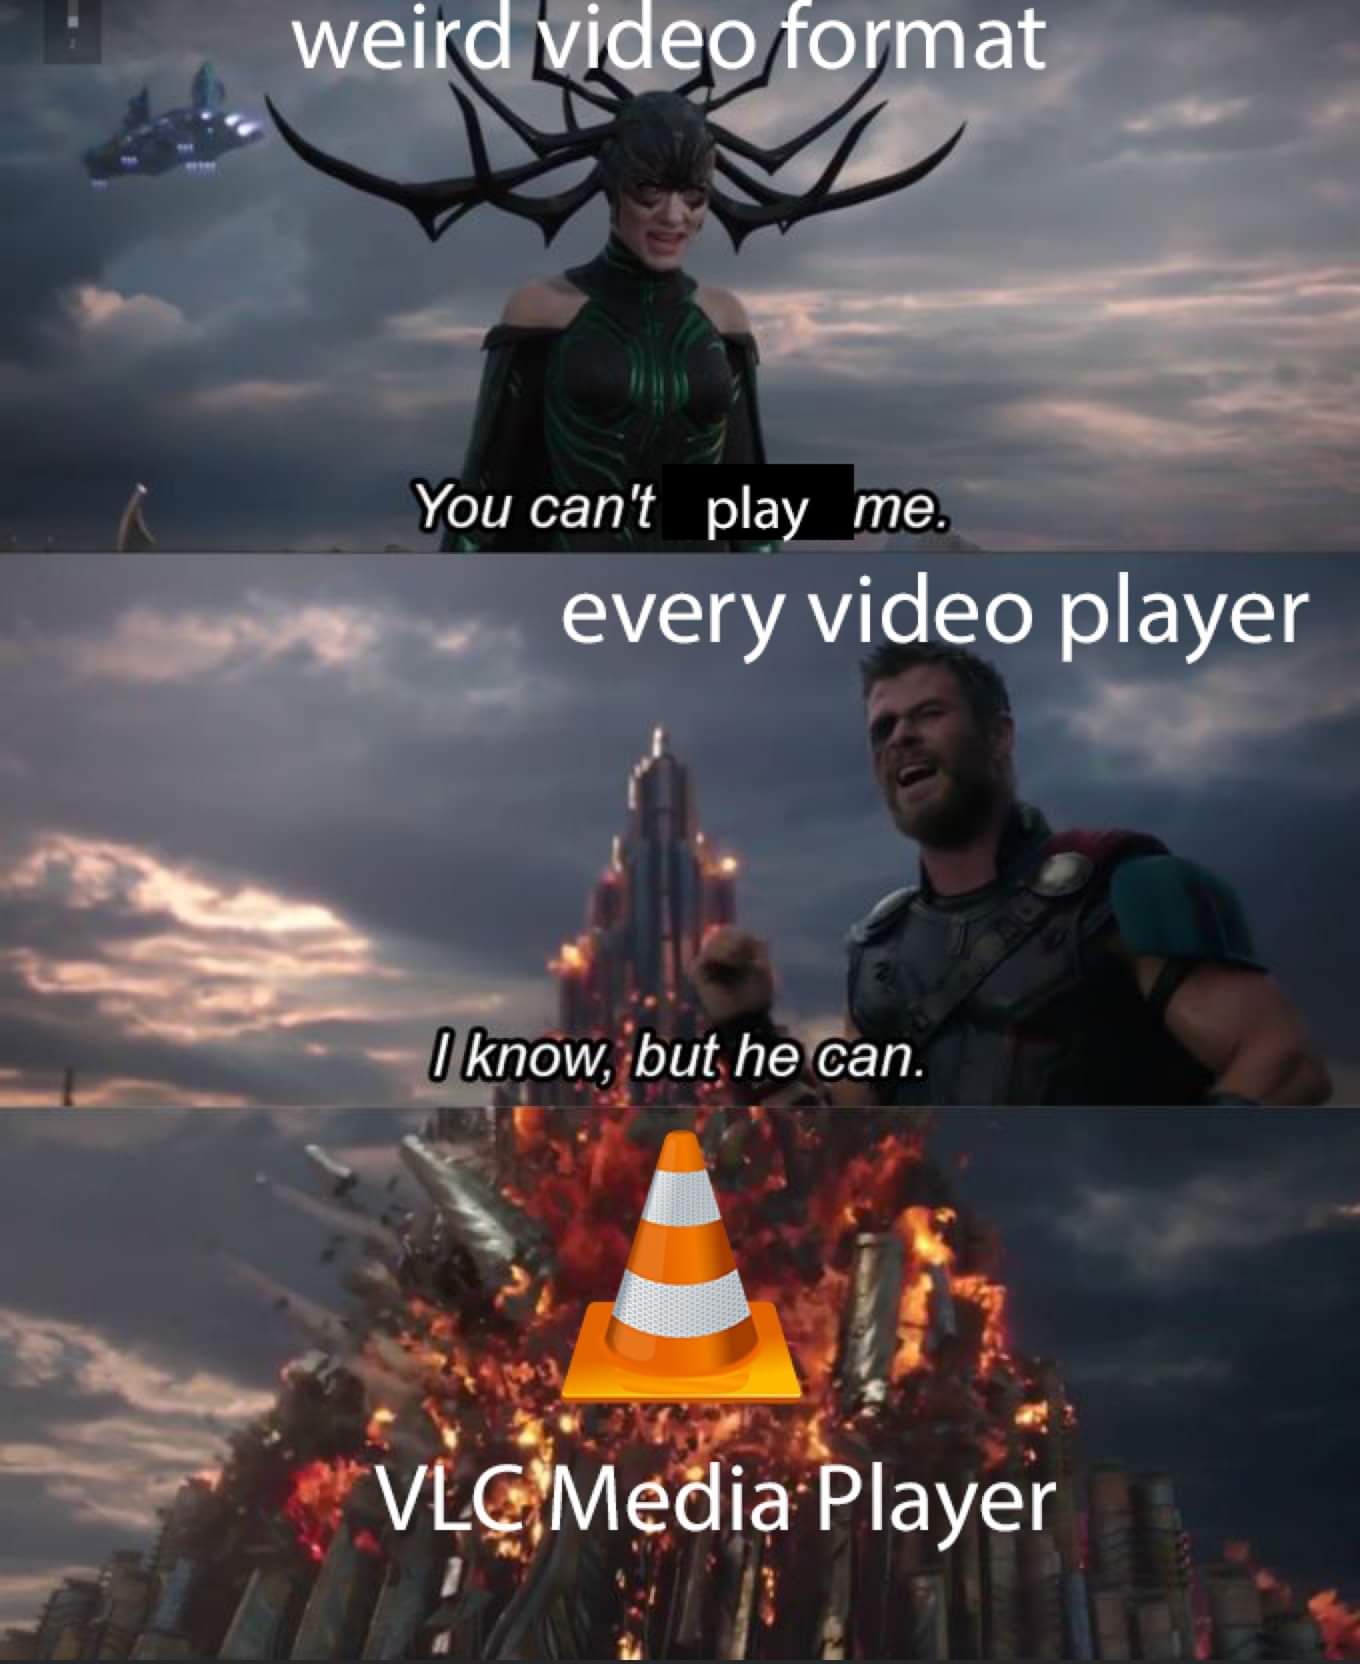 VLC for the win